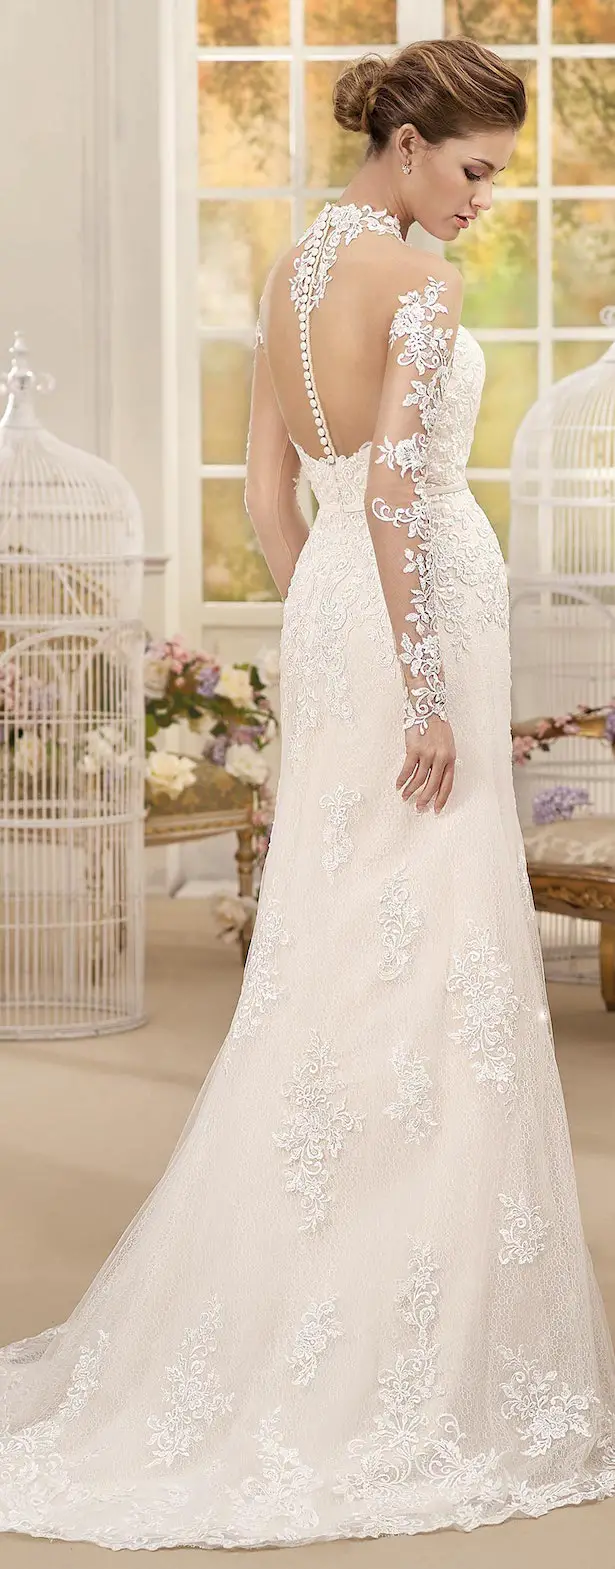 Illusion long sleeves v-neck lace a line Wedding Dress by Fara Sposa 2017 Bridal Collection